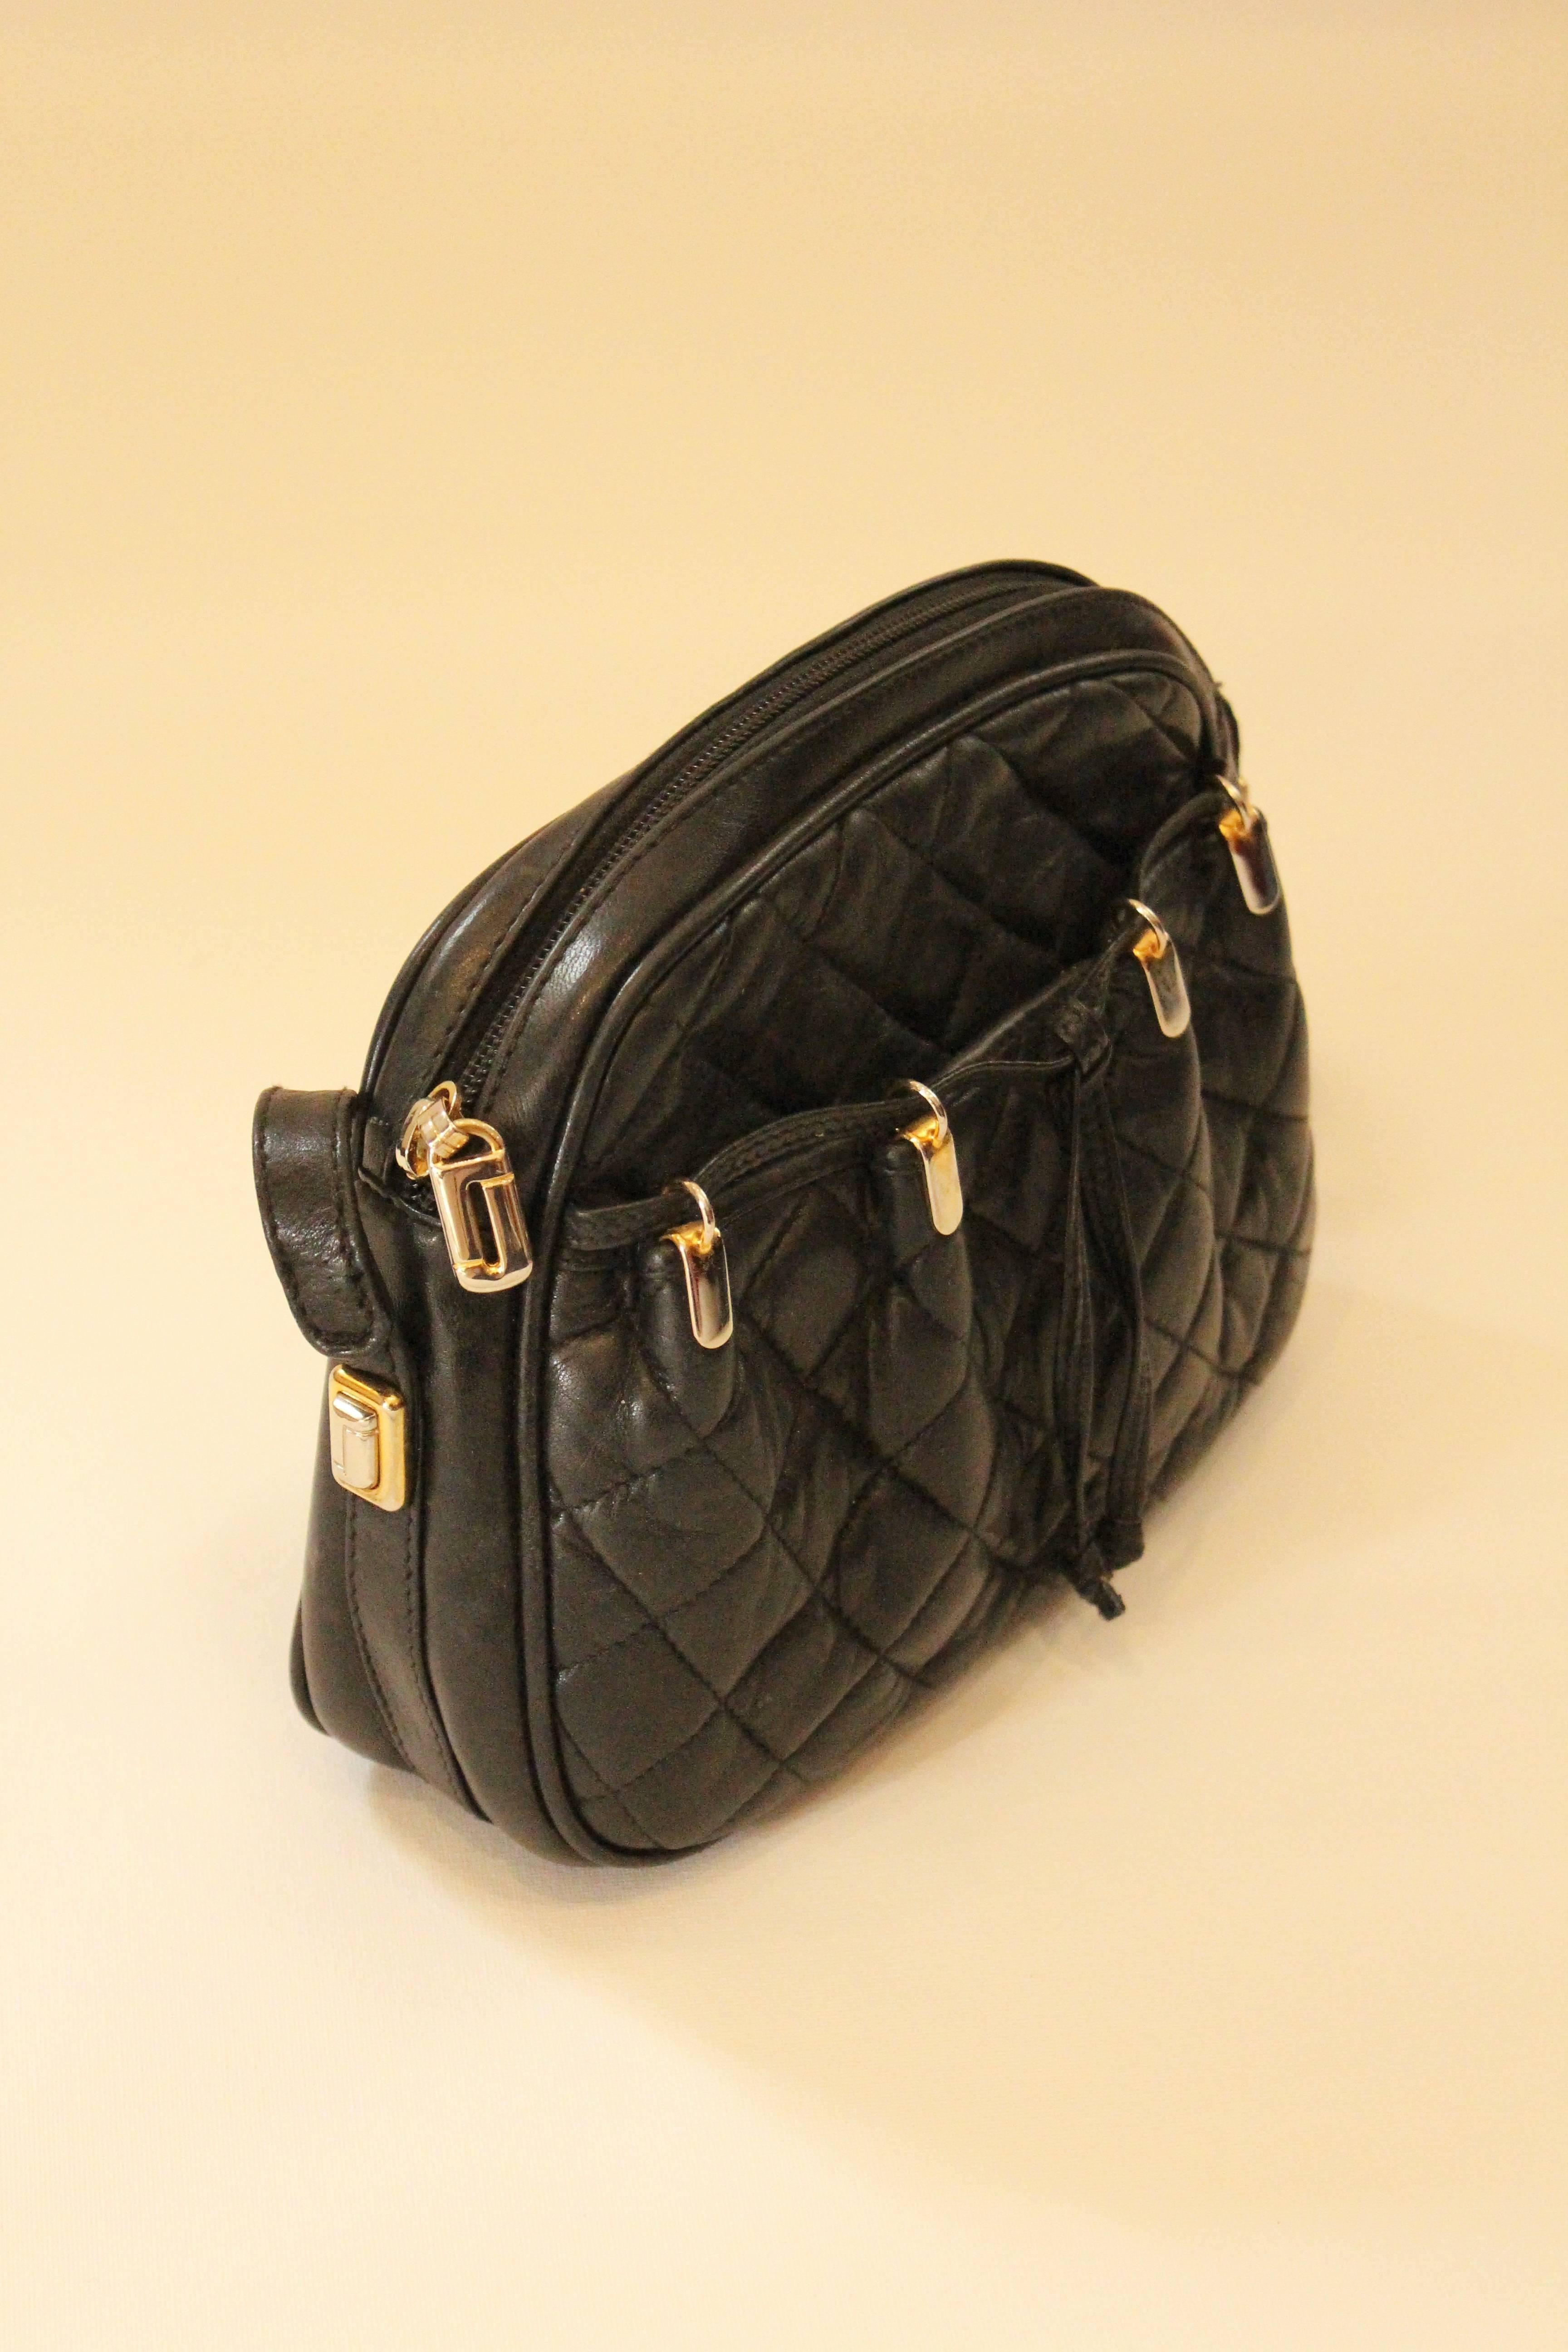 Made from the softest leather, this black, quilted Judith Leiber crossbody bag joins luxury and practicality. Red pebbled leather interior. 

Zip pocket and front pocket. Drawstring and tie detail on front. Gold hardware. 

Made in Spain. Strap